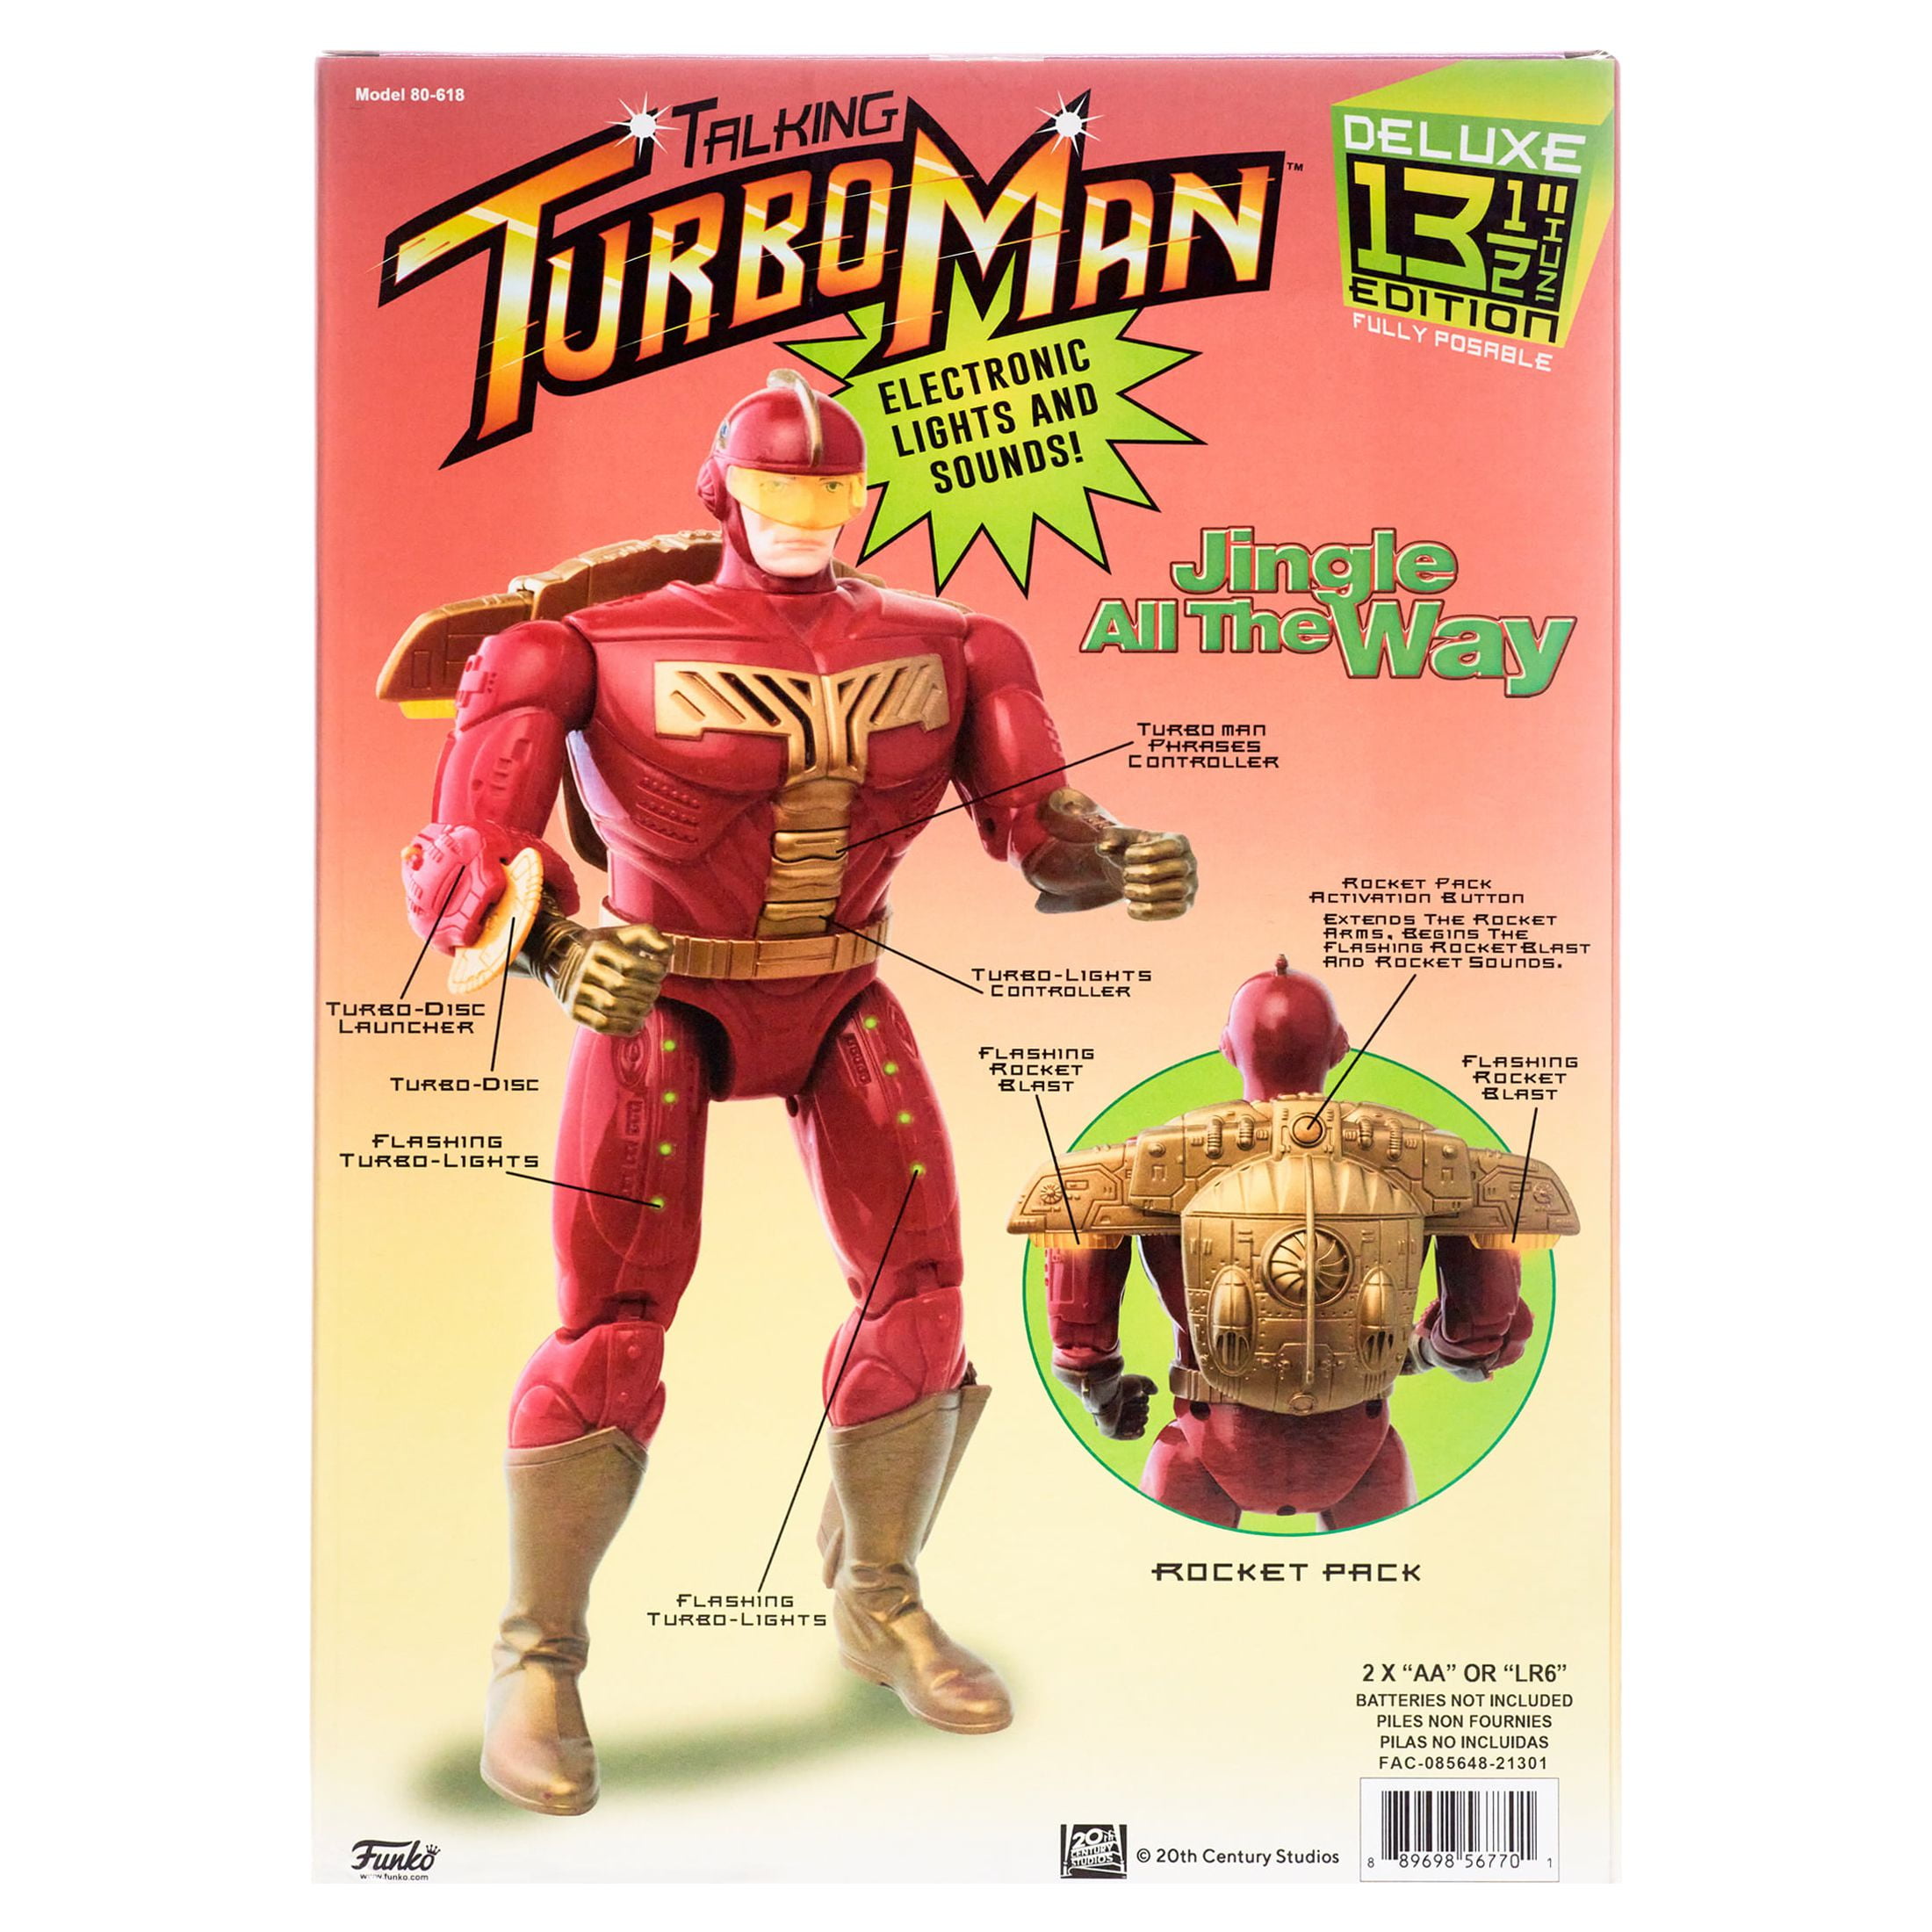 Turbo Man Walmart Exclusive Action Figure From Funko! 